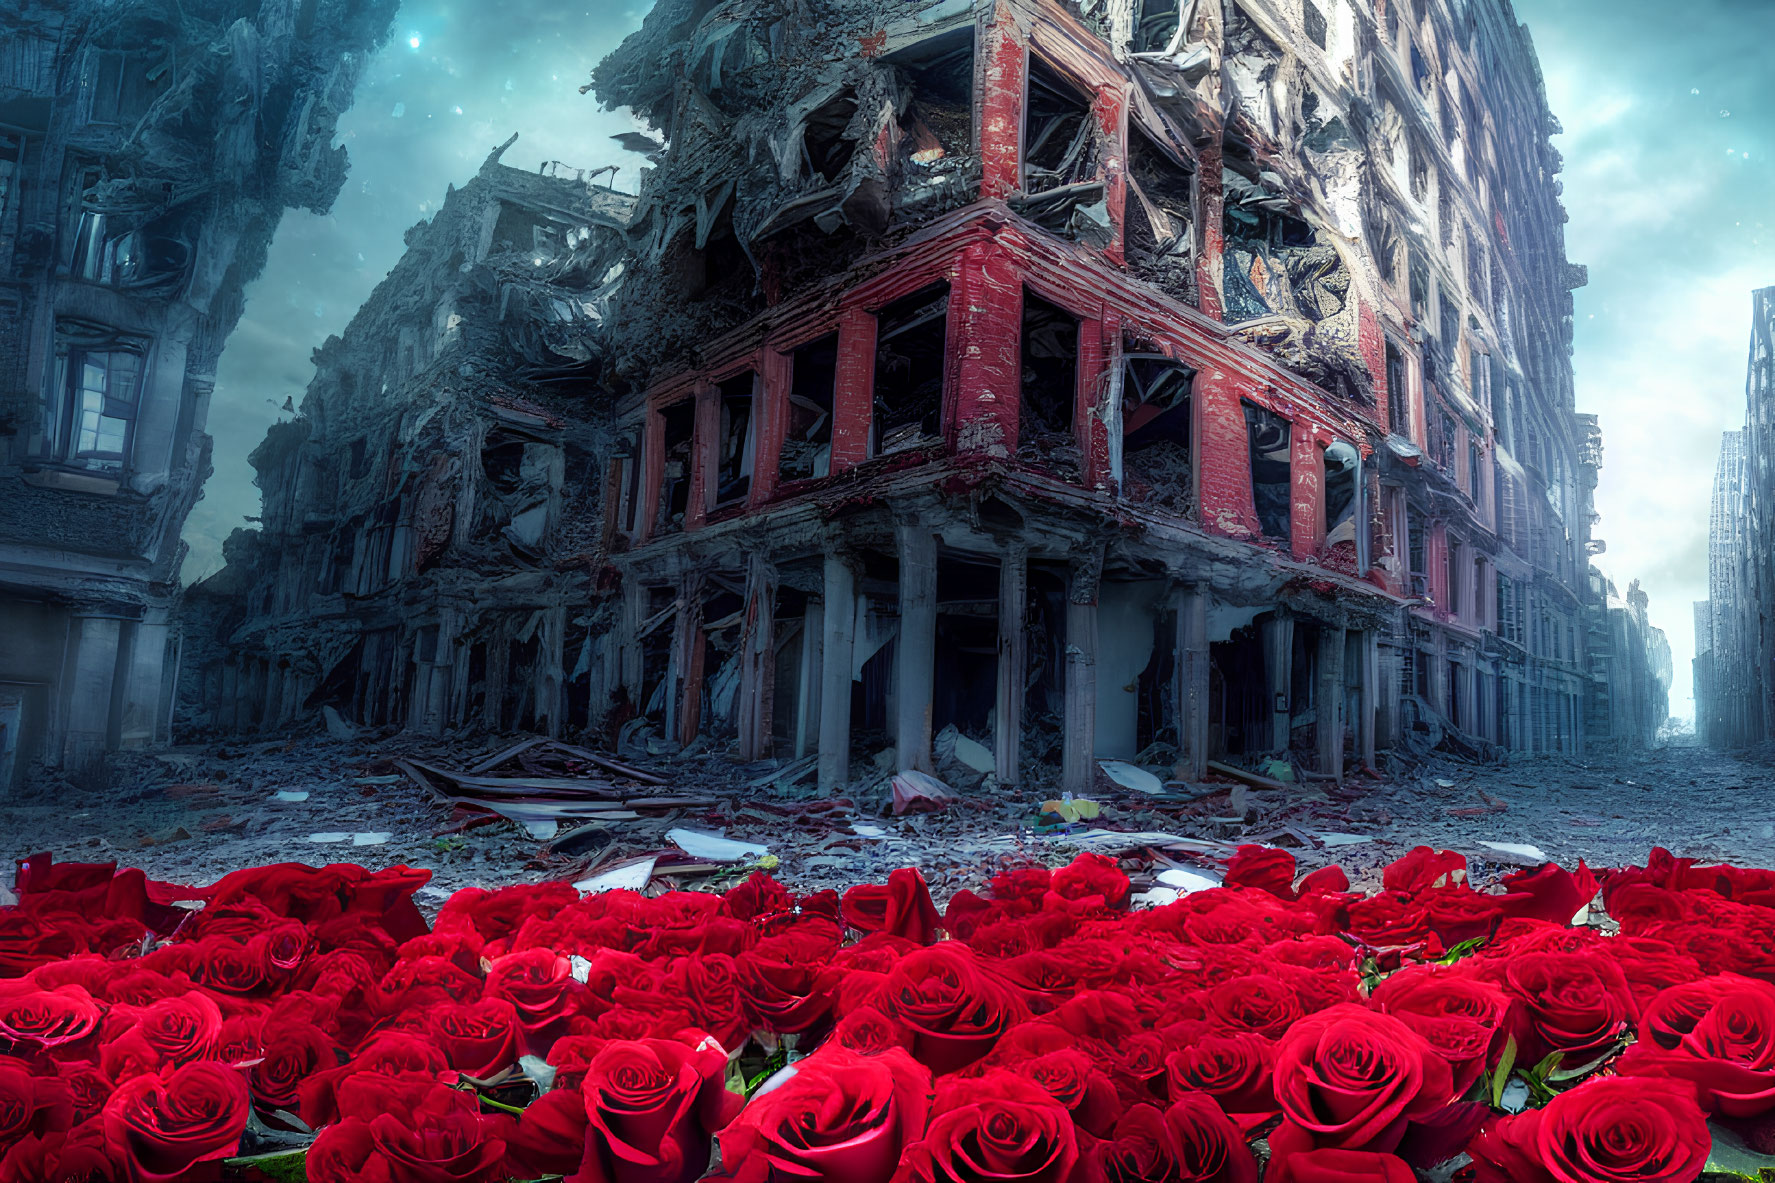 Abandoned buildings surrounded by red roses under cloudy sky